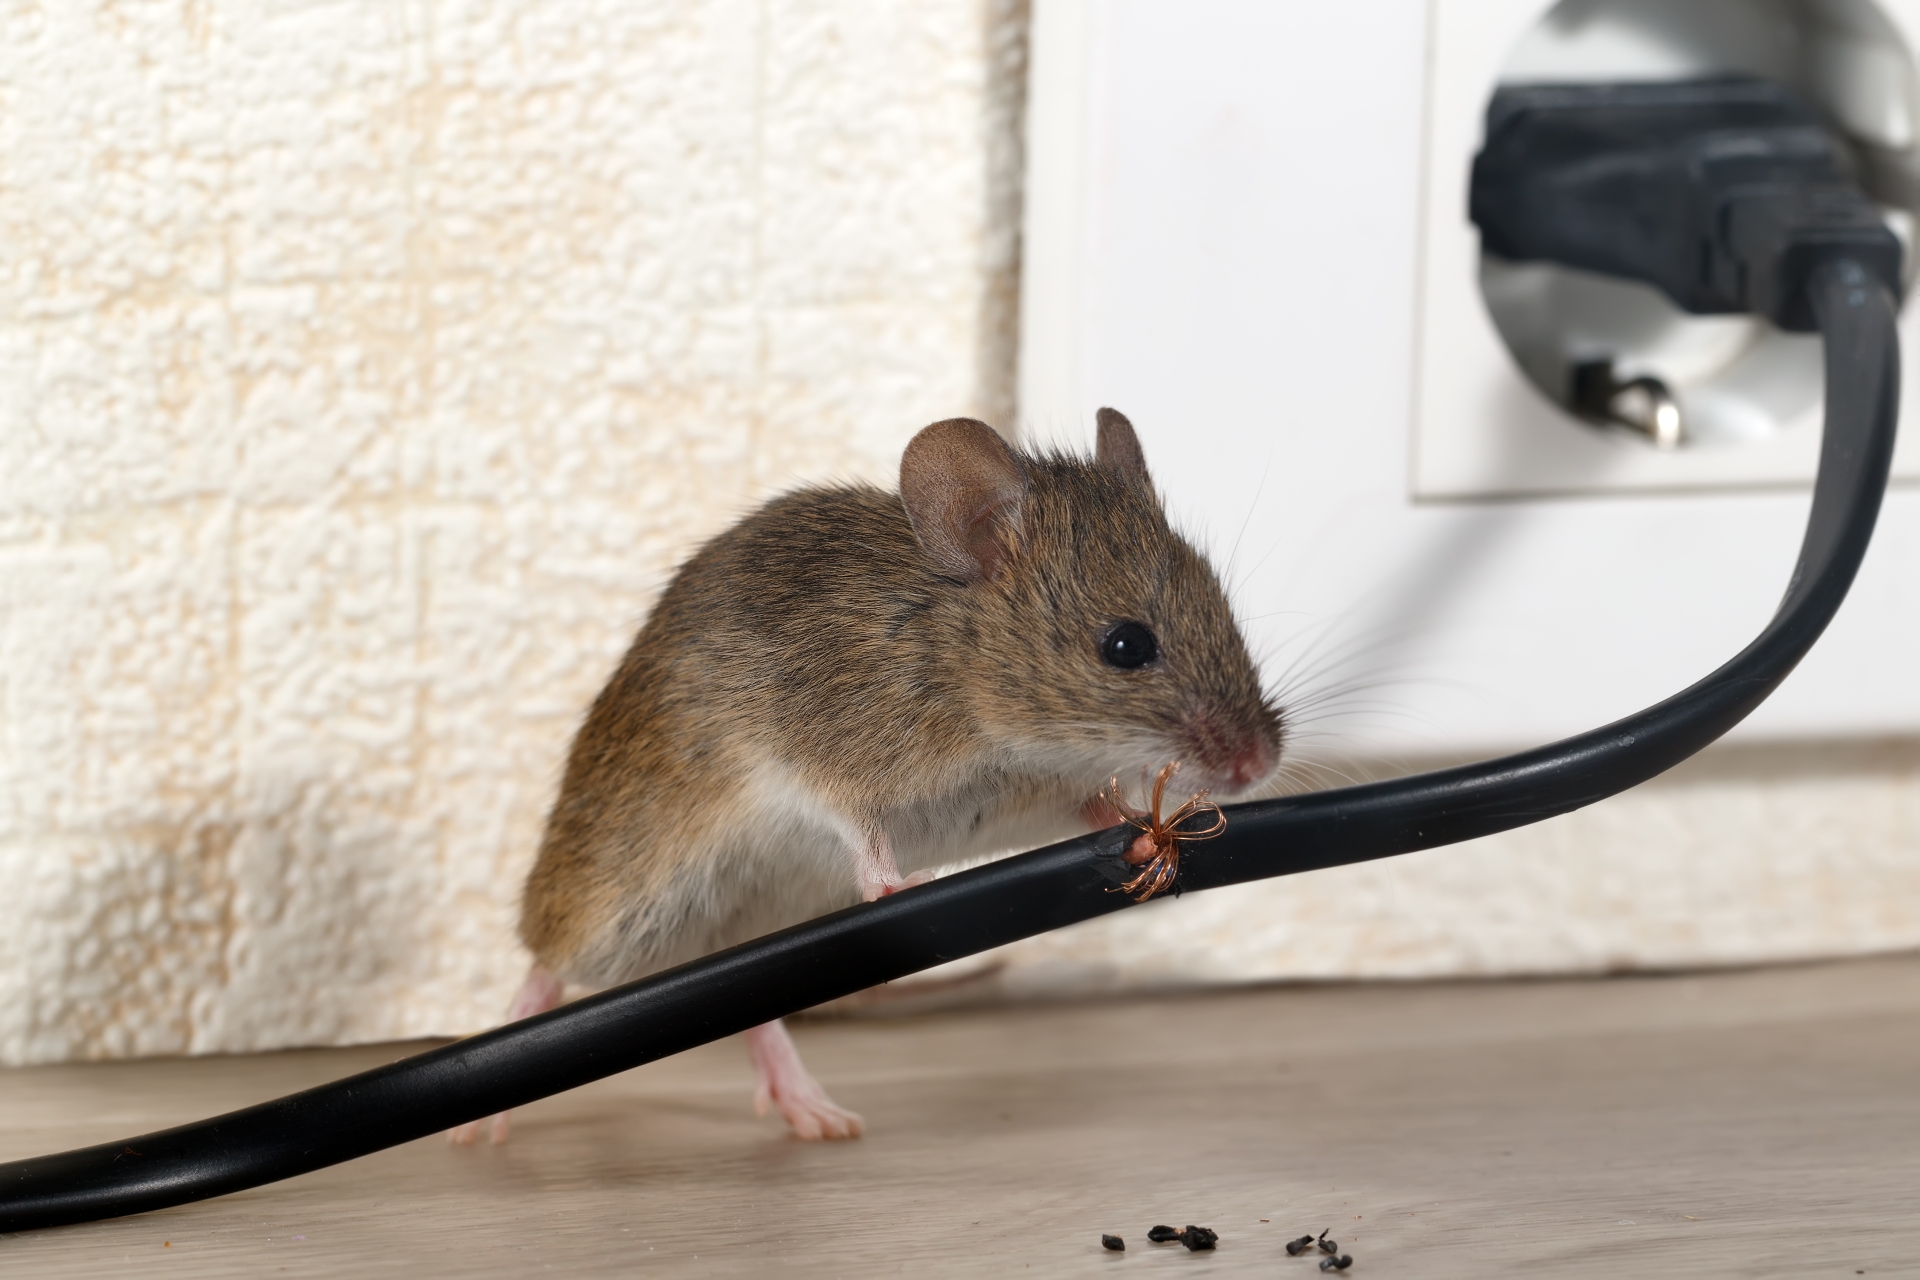 Mice Infestation, Pest Control in Hayes, Harlington, UB3, UB4. Call Now 020 8166 9746